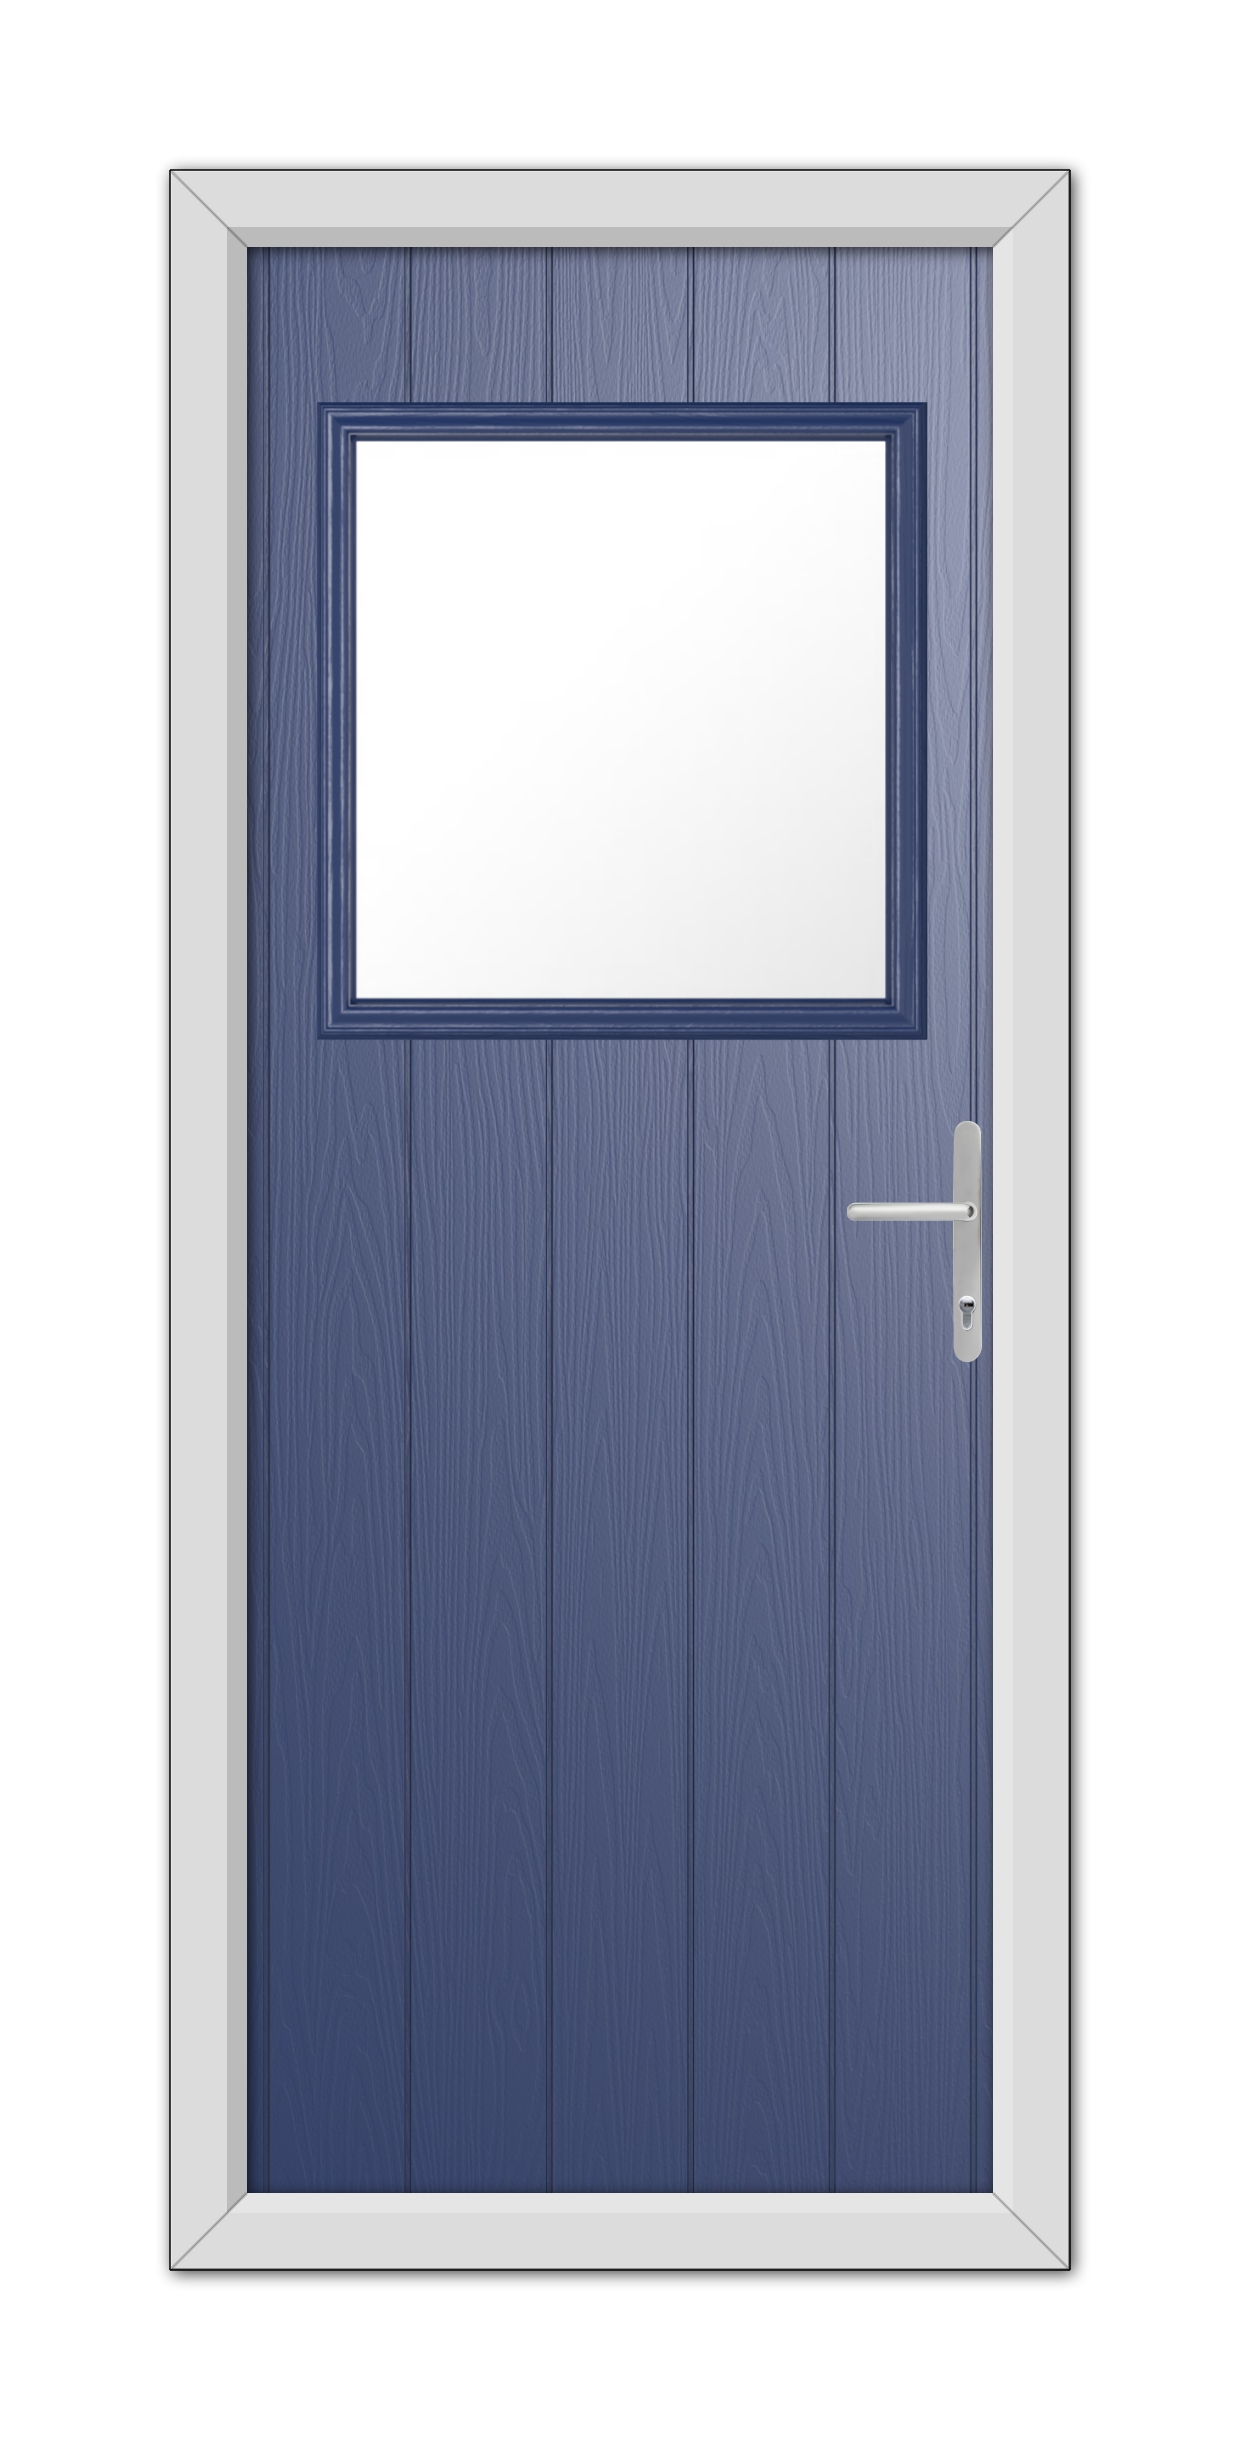 A Blue Fife Composite Door 48mm Timber Core with a rectangular window and a white handle, set in a white frame.